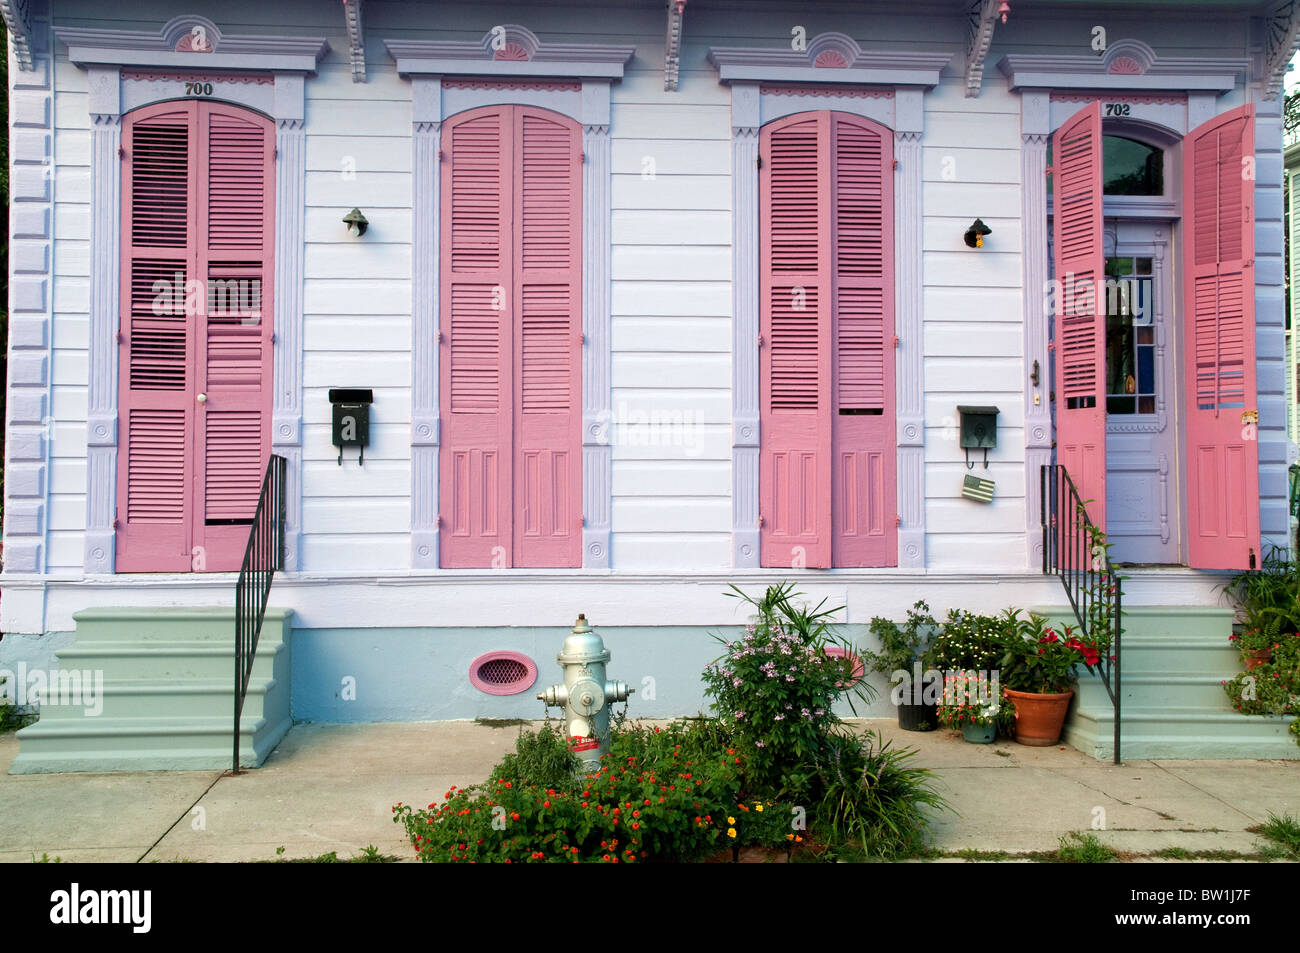 The shuttered doorways and windows of a shotgun house in the Marigny-Bywater neighbourhood of New Orleans, Louisiana, United States. Stock Photo